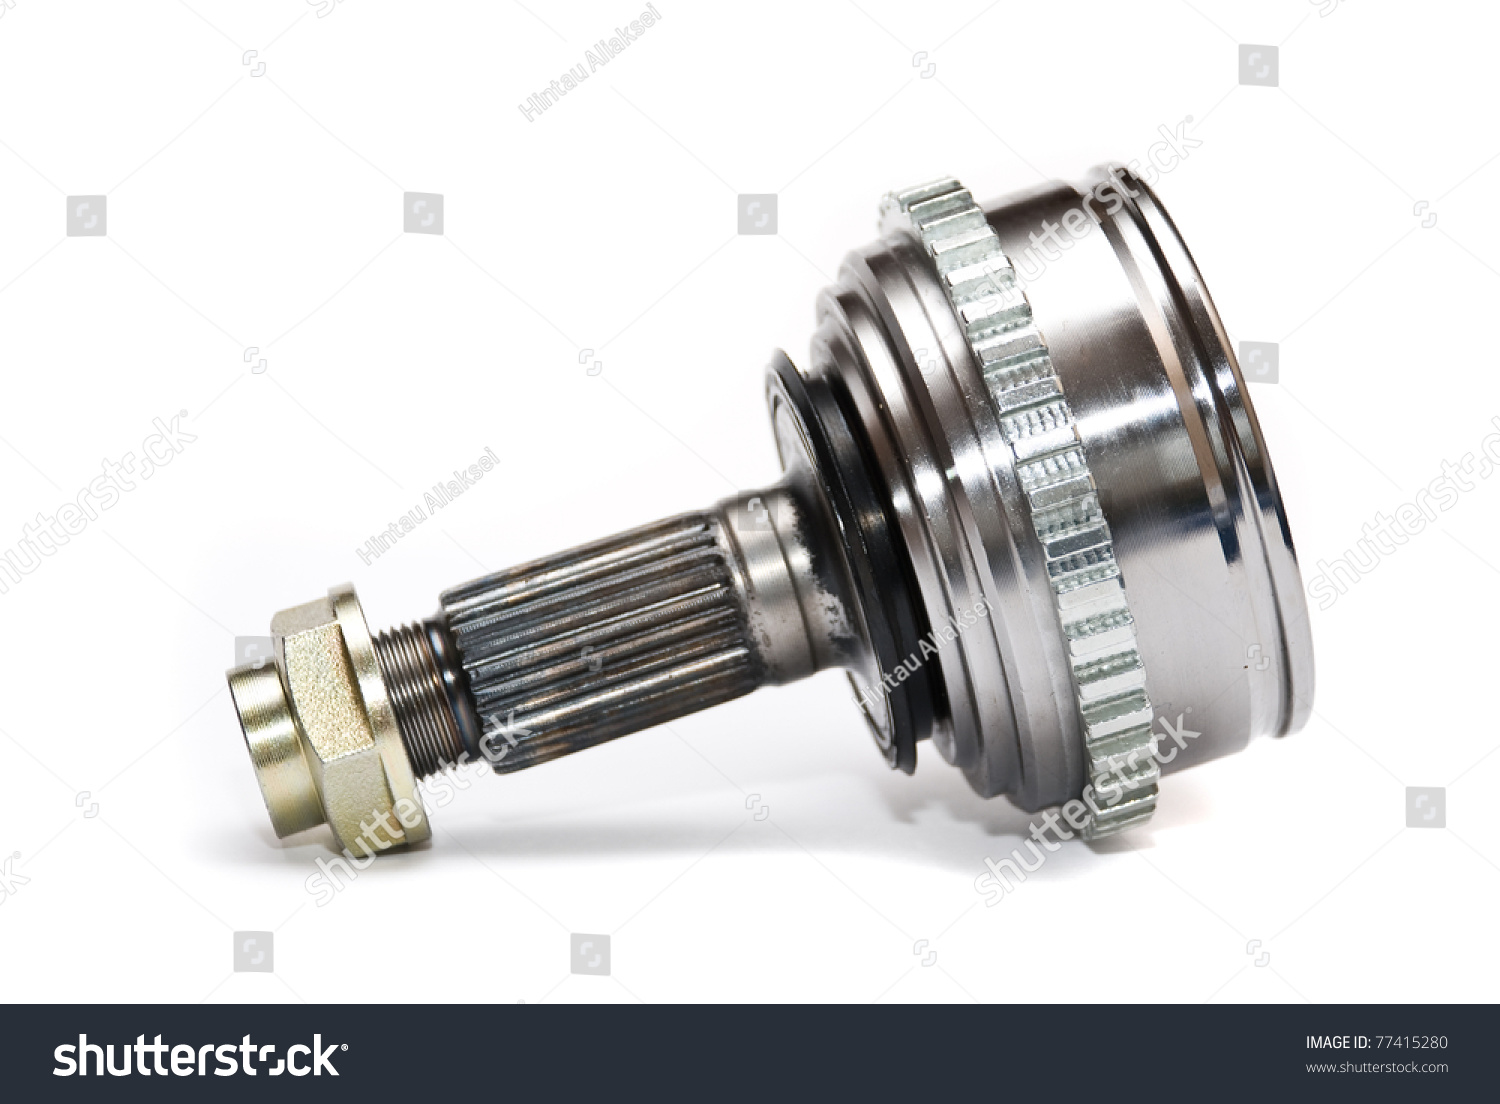 cv joints  constant velocity joints  part wheel of the car  stock photo 77415280   shutterstock